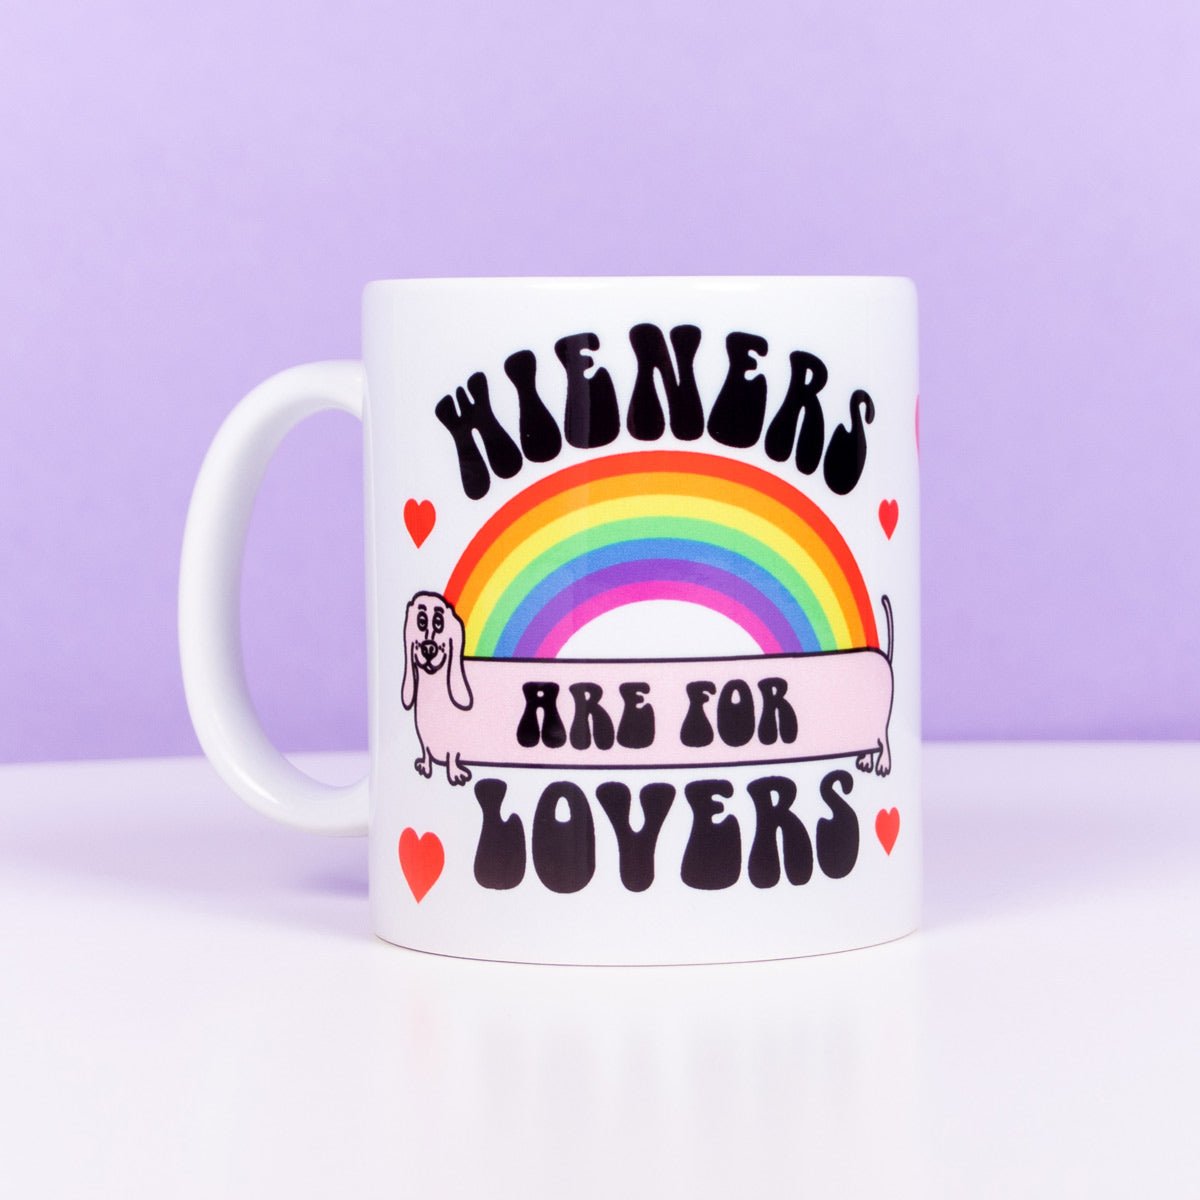 wieners are for lovers mug - bean goods